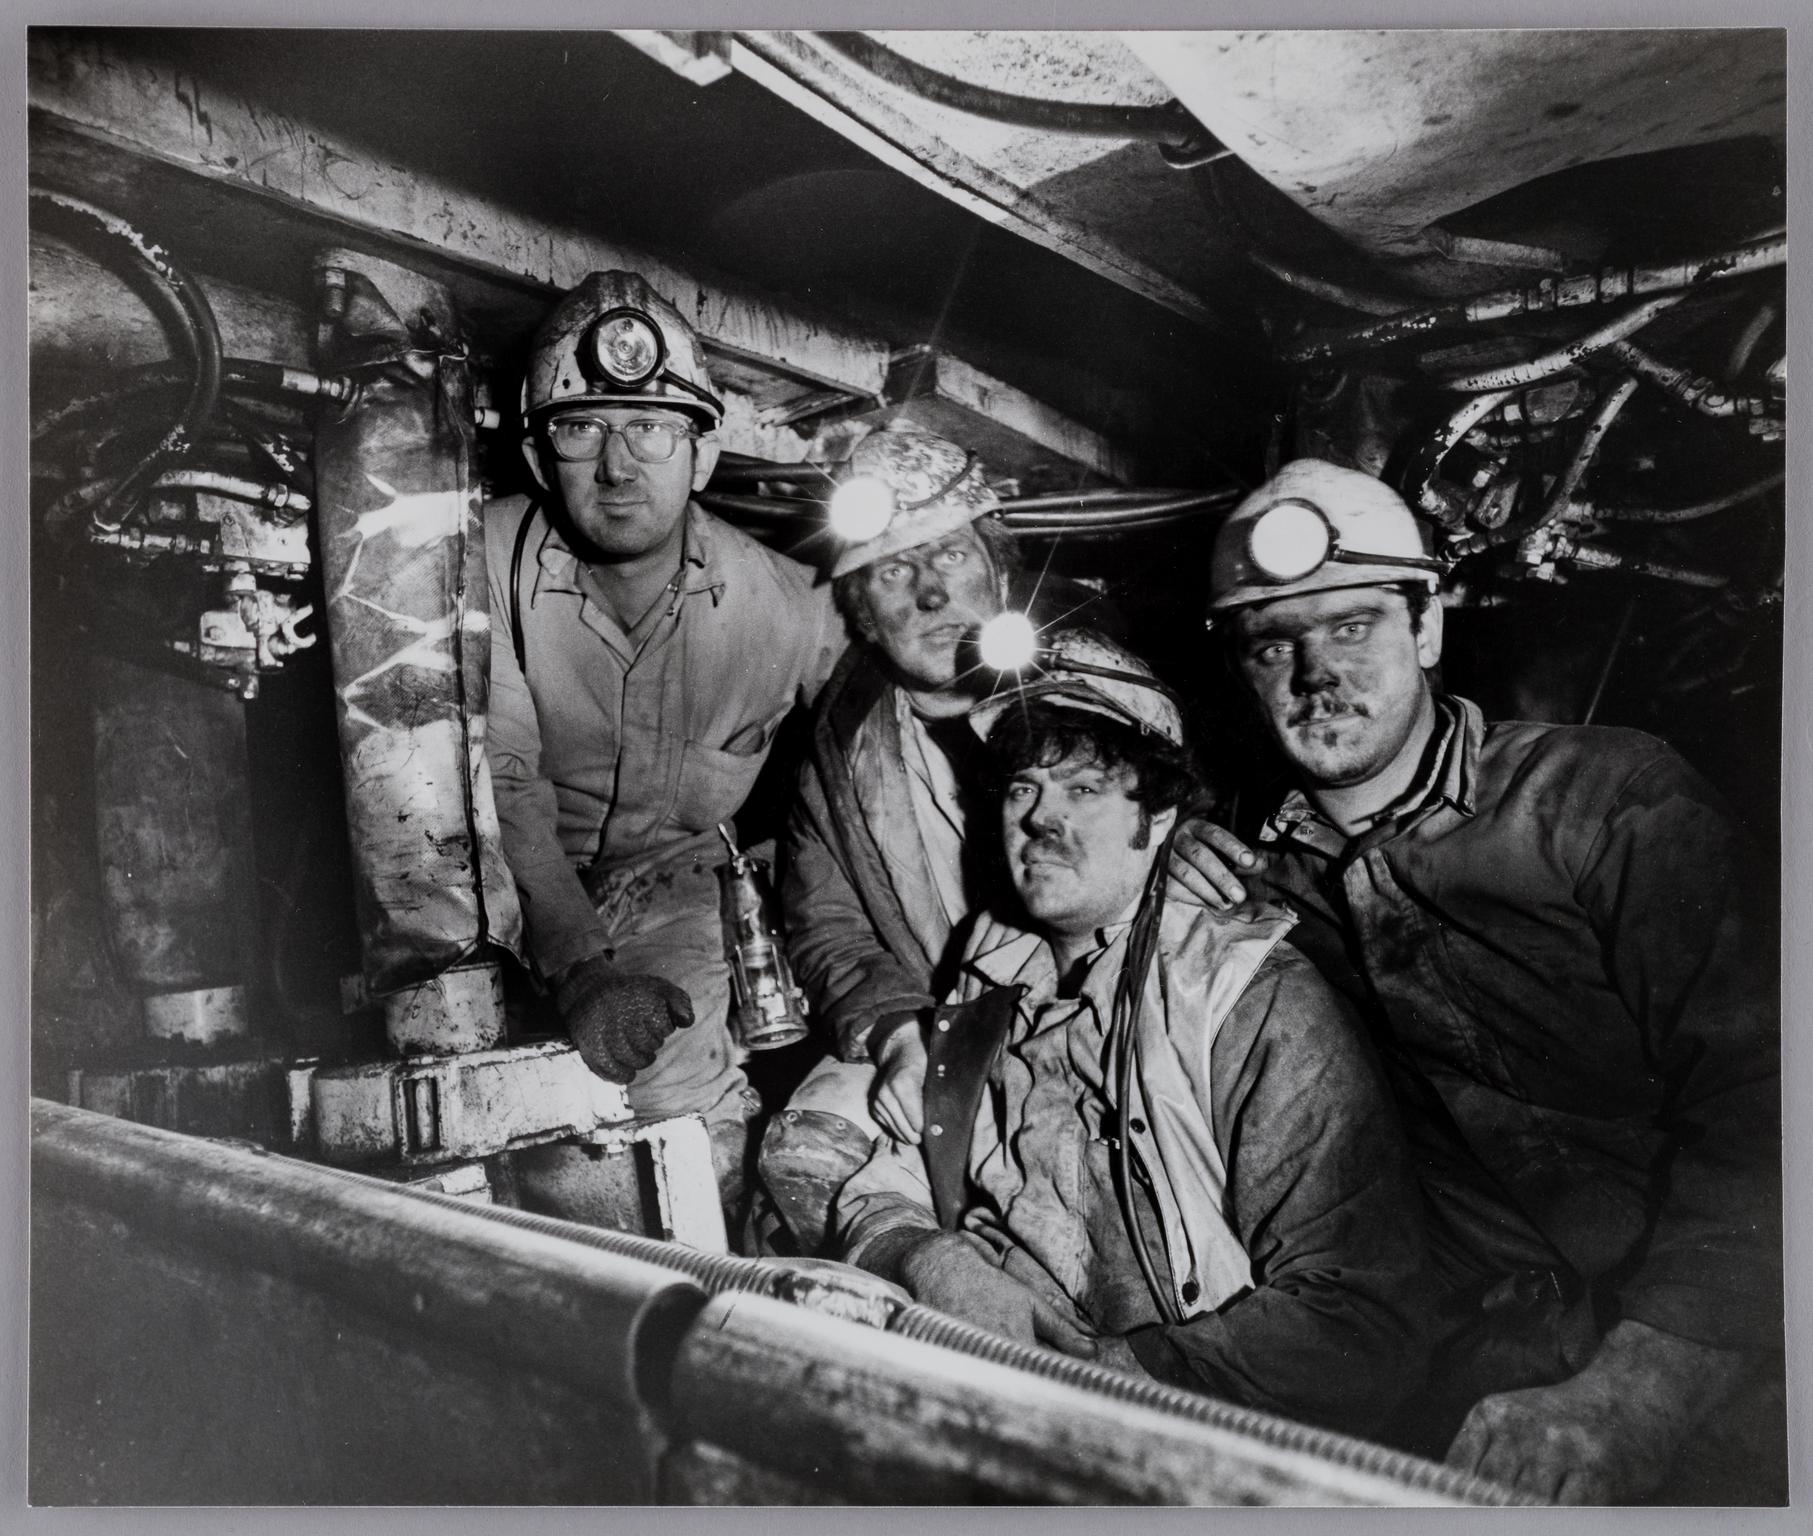 Blaenant Colliery, photograph